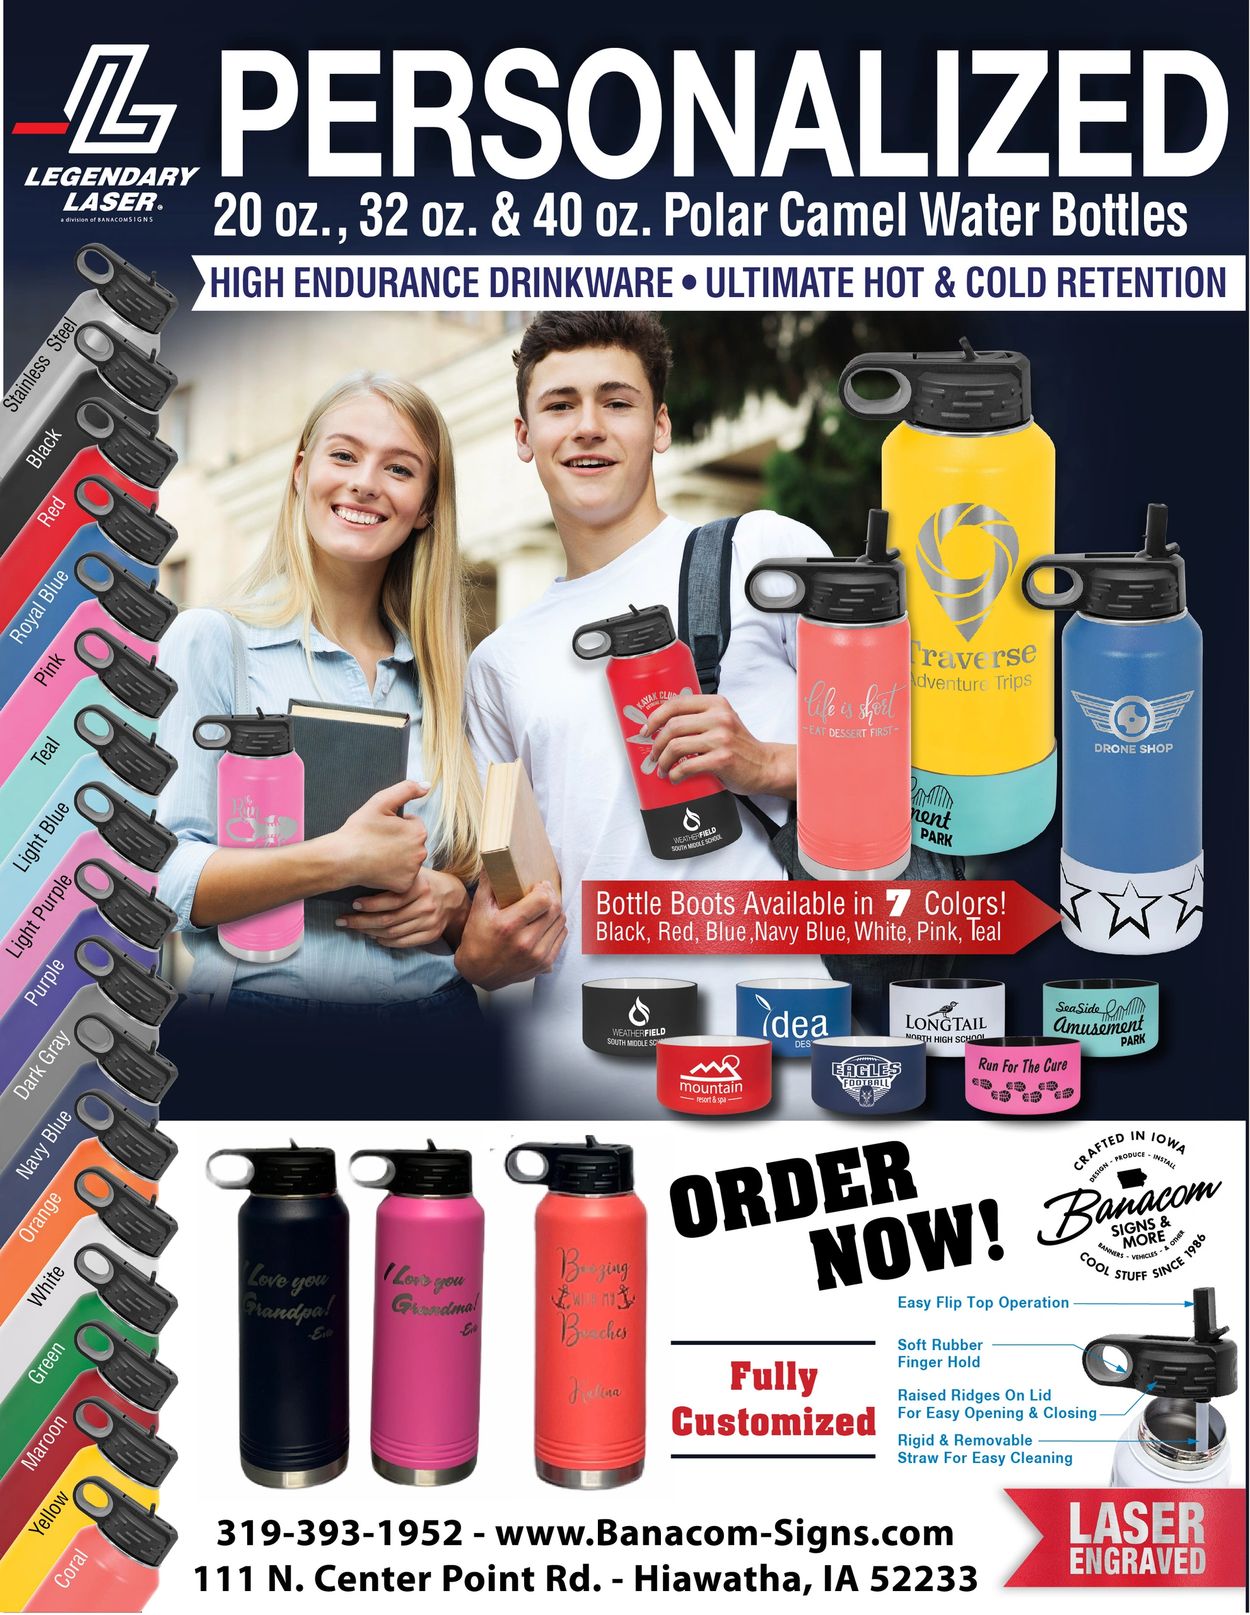 Polar Camel Brand Custom Water Bottles - Powder Coated and Engraved to Suit Your Needs